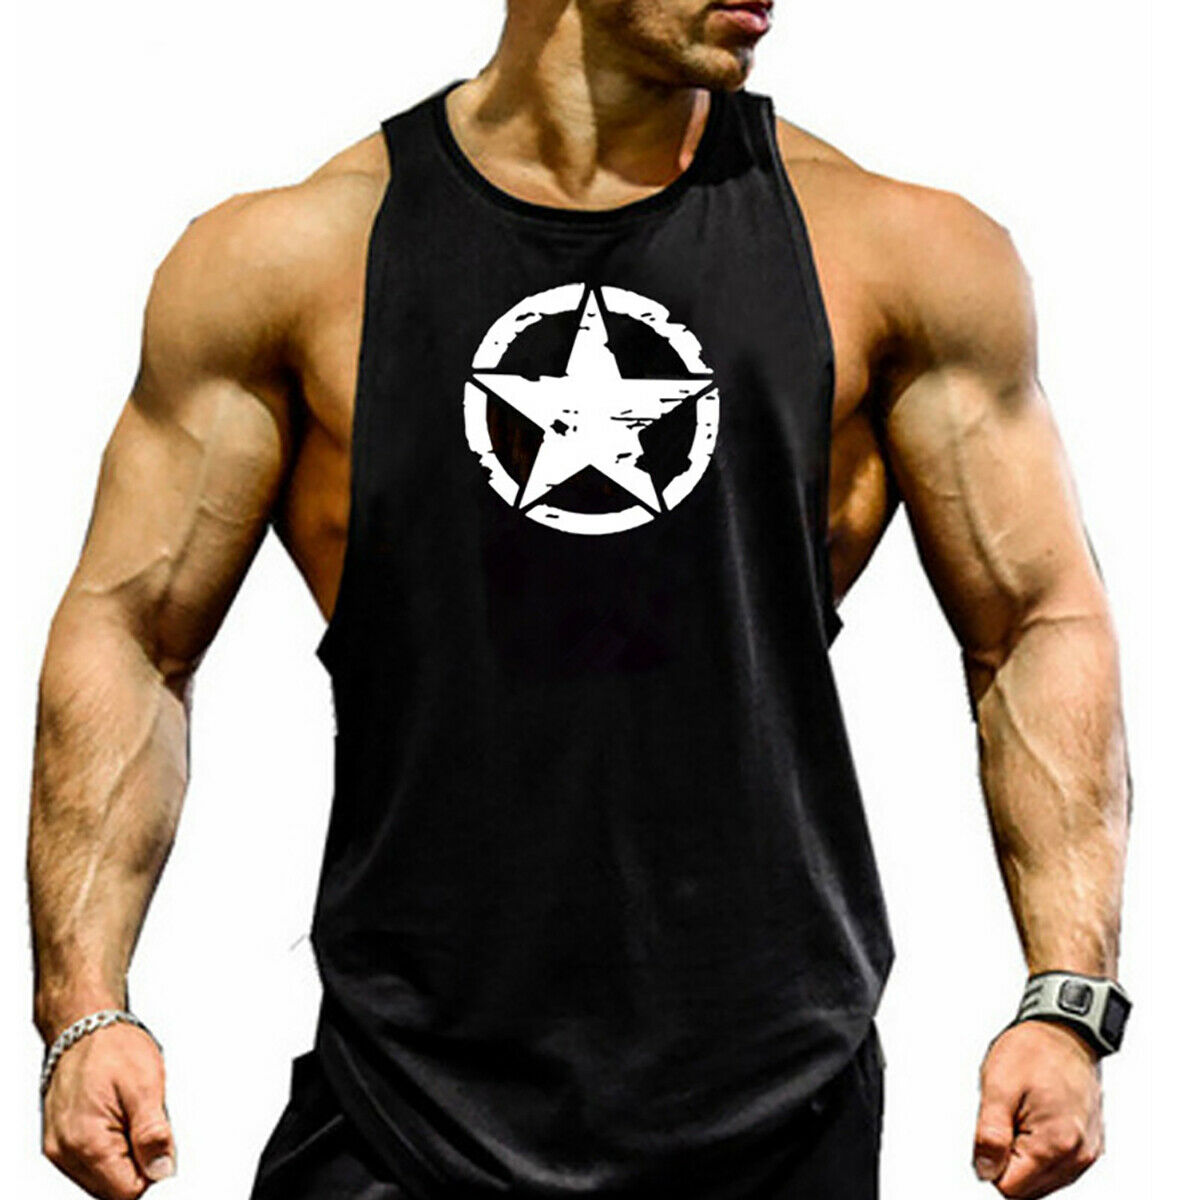 nine bull Mens Gym Workout Tank Top Muscle Stringer Bodybuilding Fitness T-Shirts Tops 2 Pack 